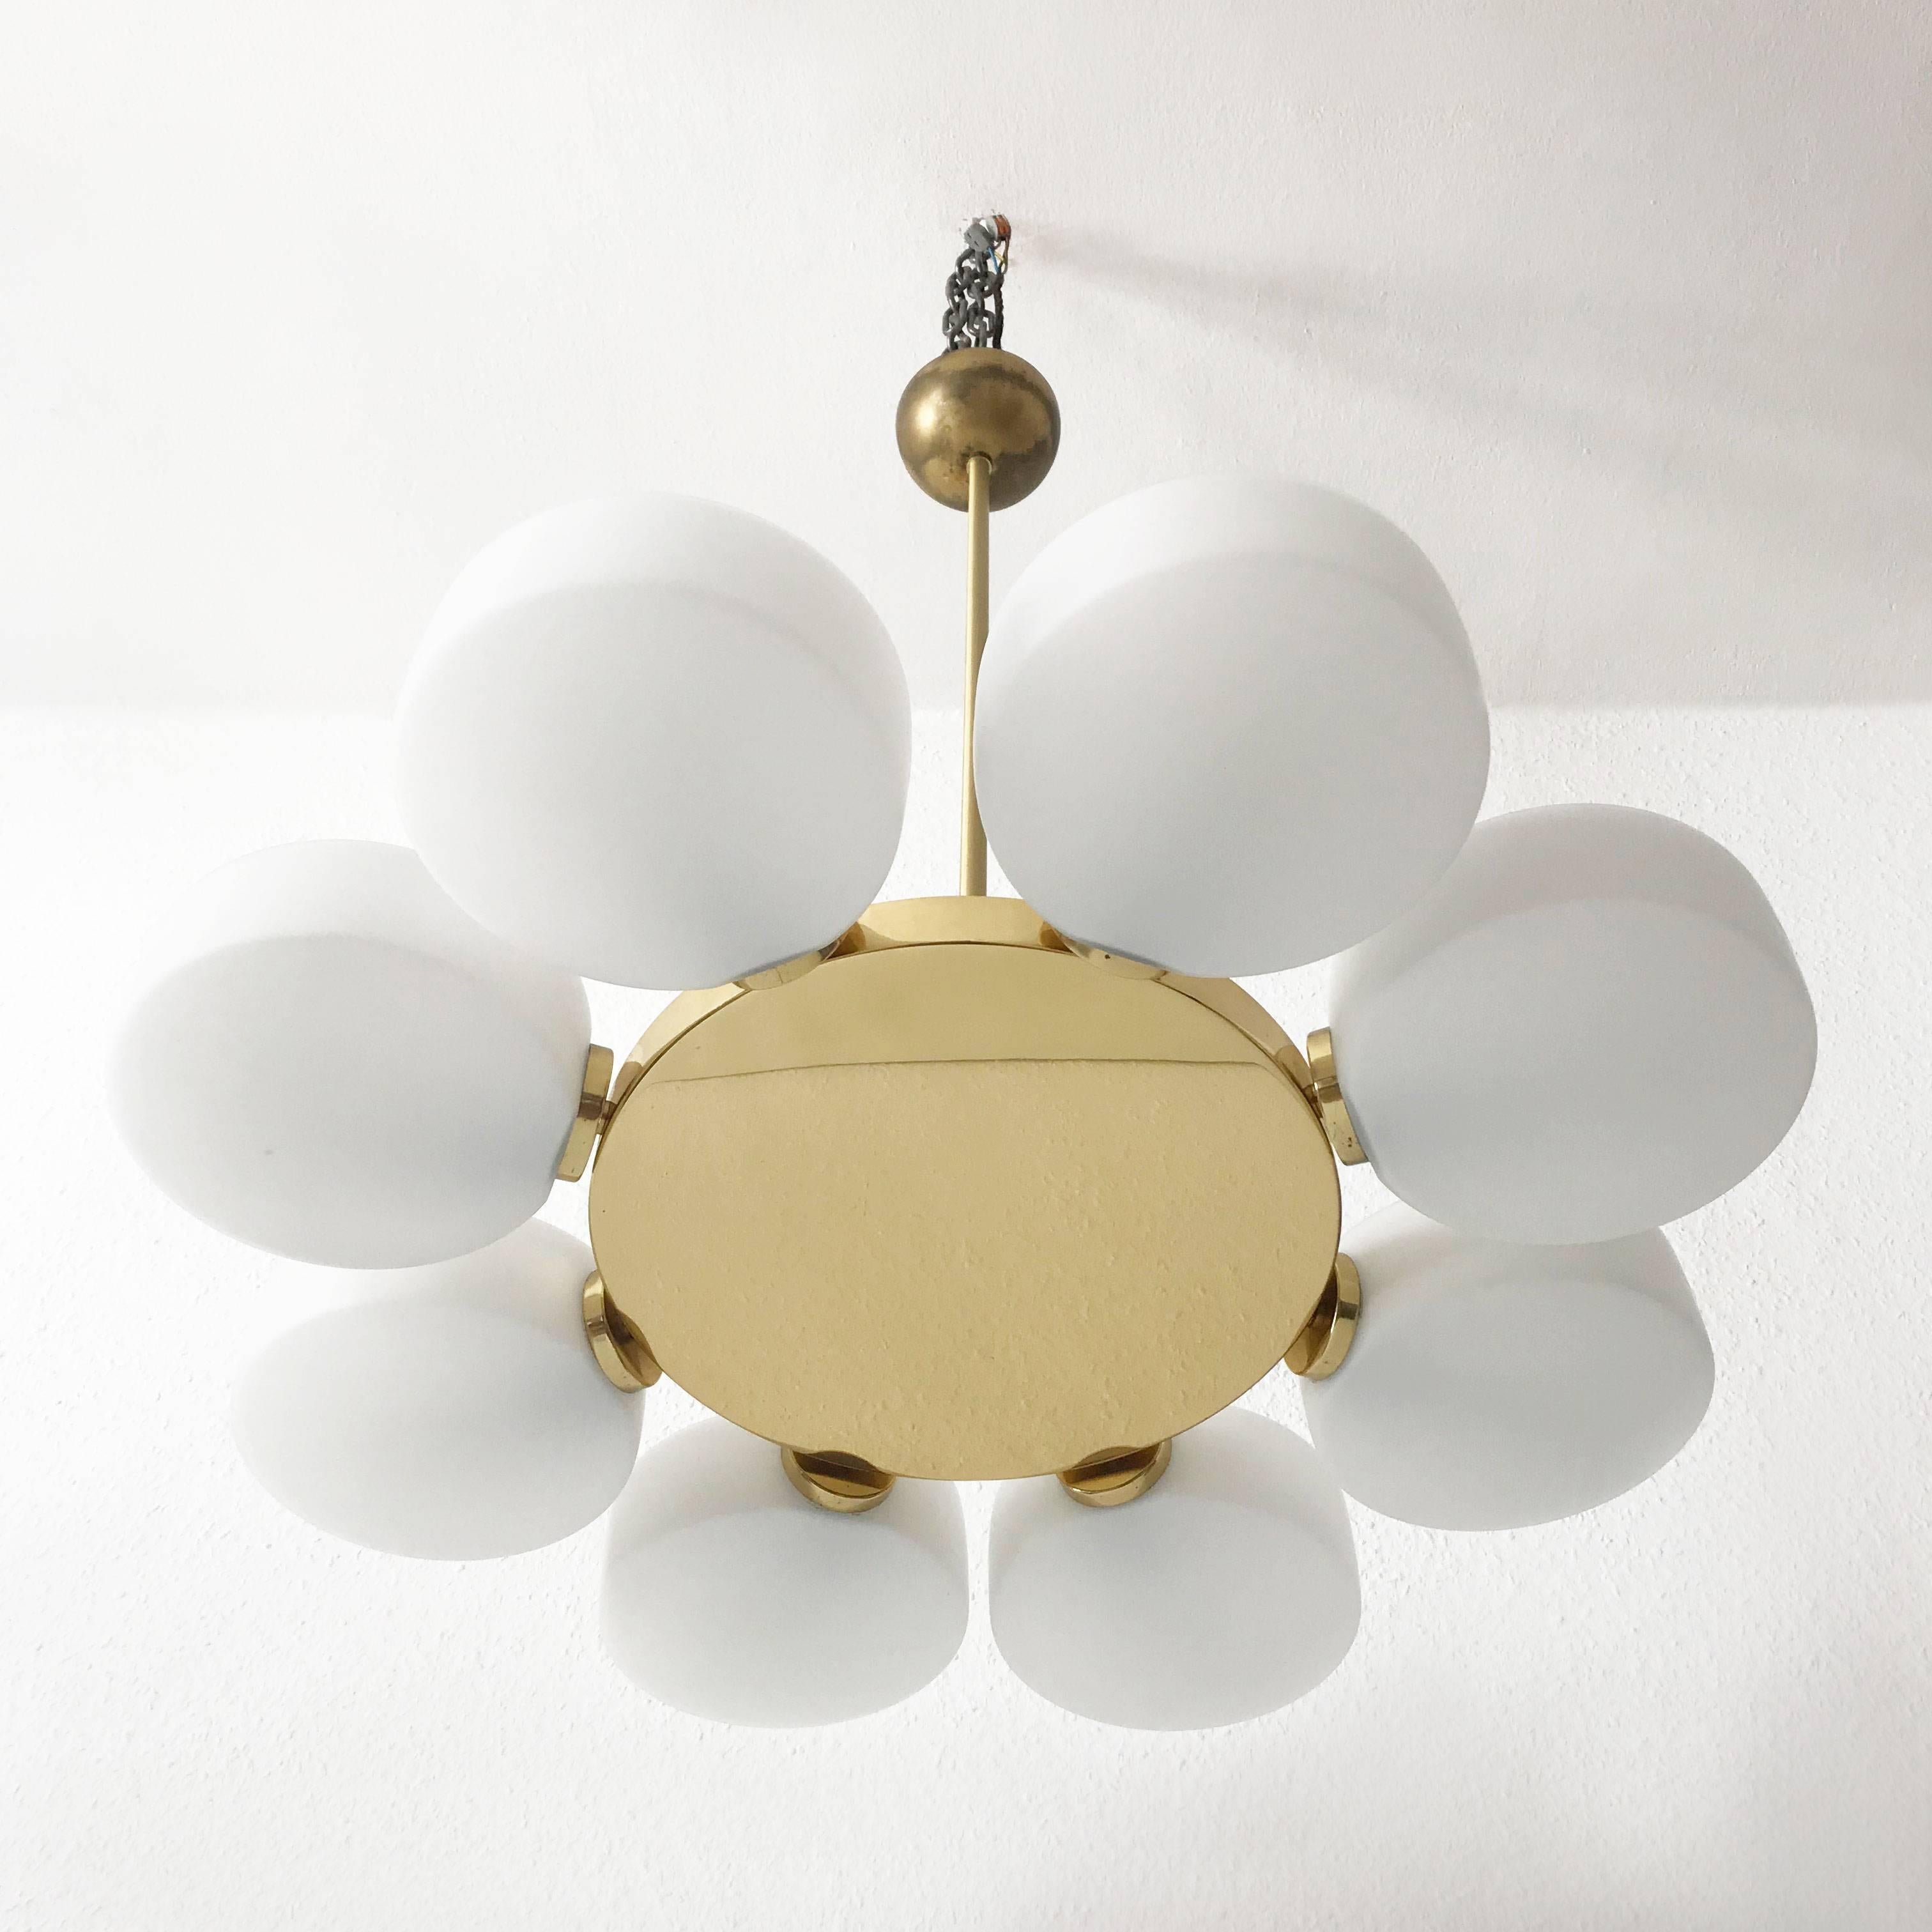 Spectacular eight-armed Mid-Century Modern Sputnik disk chandelier or pendant lamp by Kaiser Leuchten, Germany, 1960s.
The polished brass body holds eight opaline glass disks which can be rotated so that the chandeliers look can be chanced if